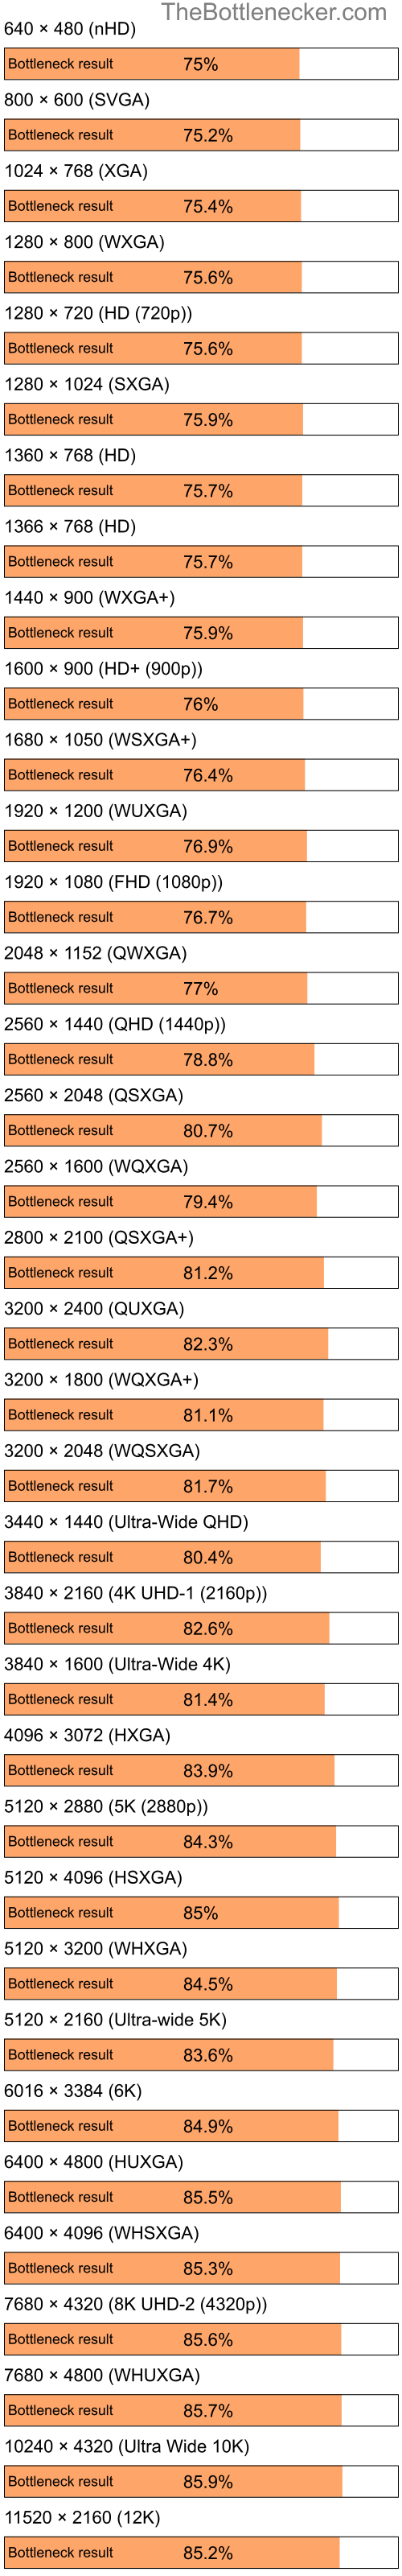 Bottleneck results by resolution for Intel Pentium 4 and AMD Radeon X1270 in General Tasks